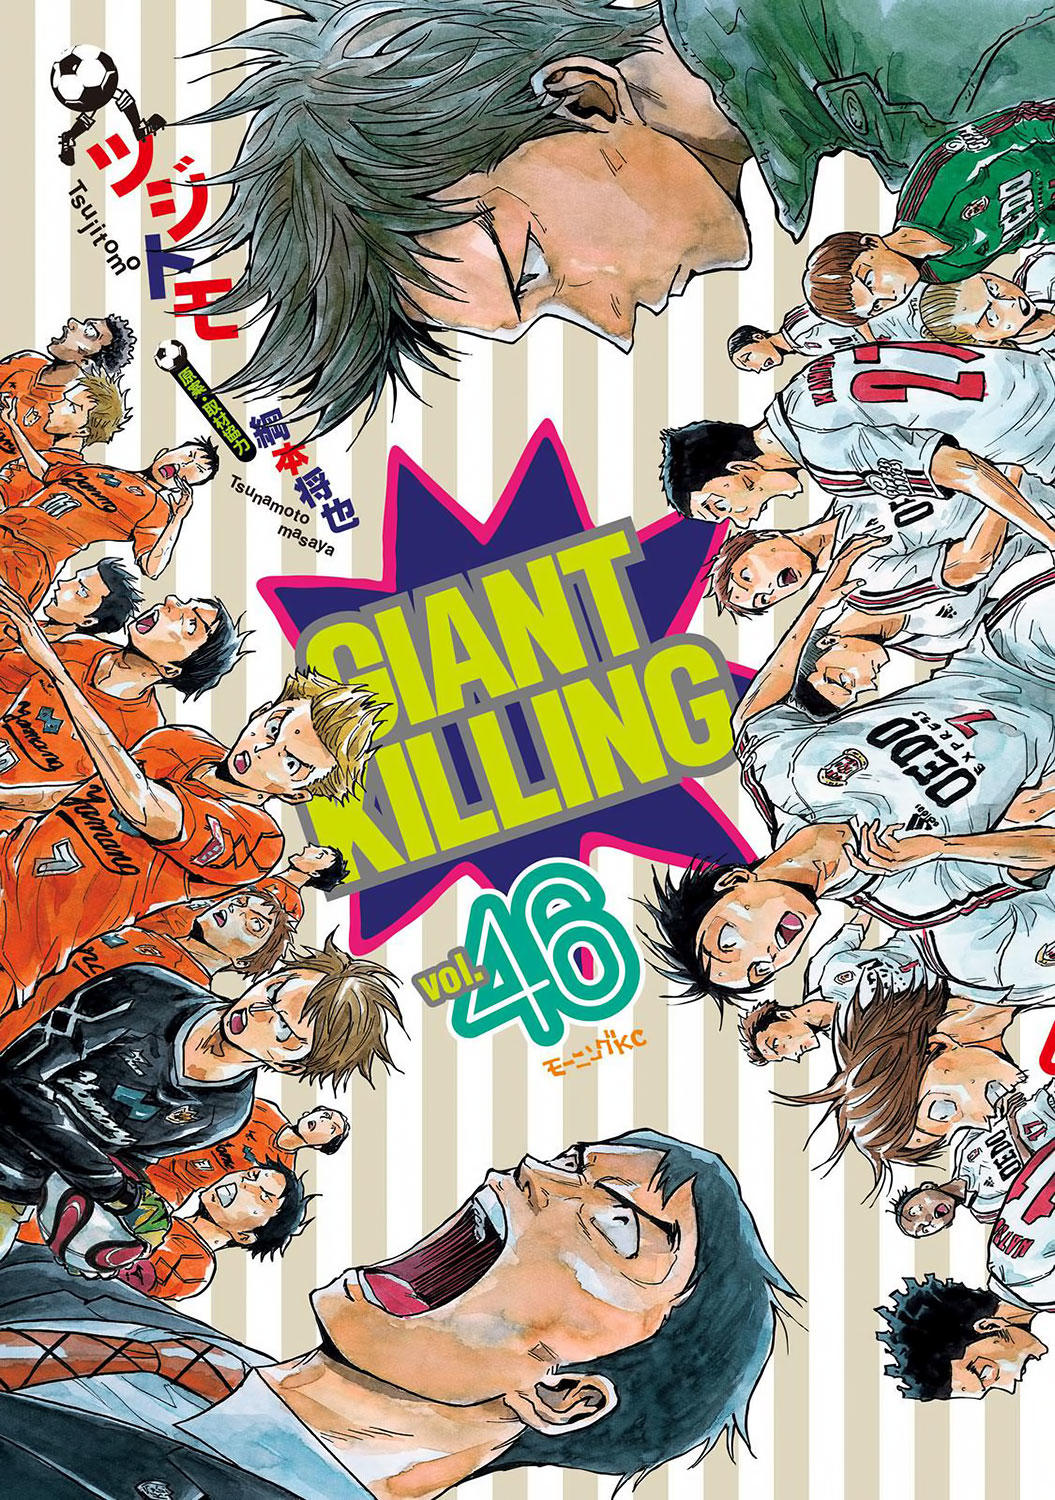 Giant killing capitulo 2, By Giant killing